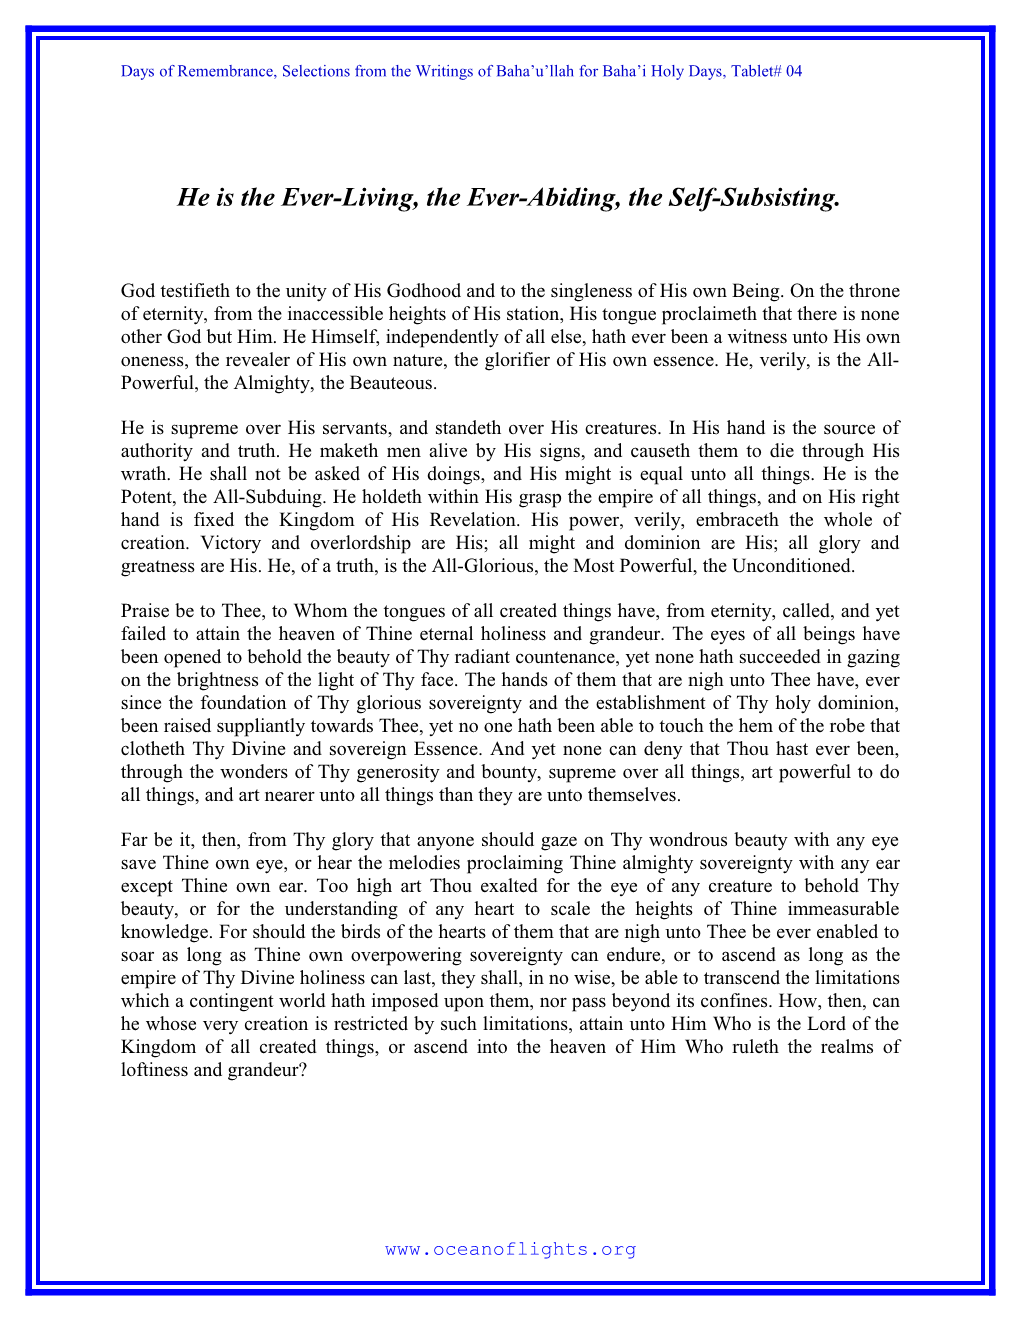 He Is the Ever-Living, the Ever-Abiding, the Self-Subsisting